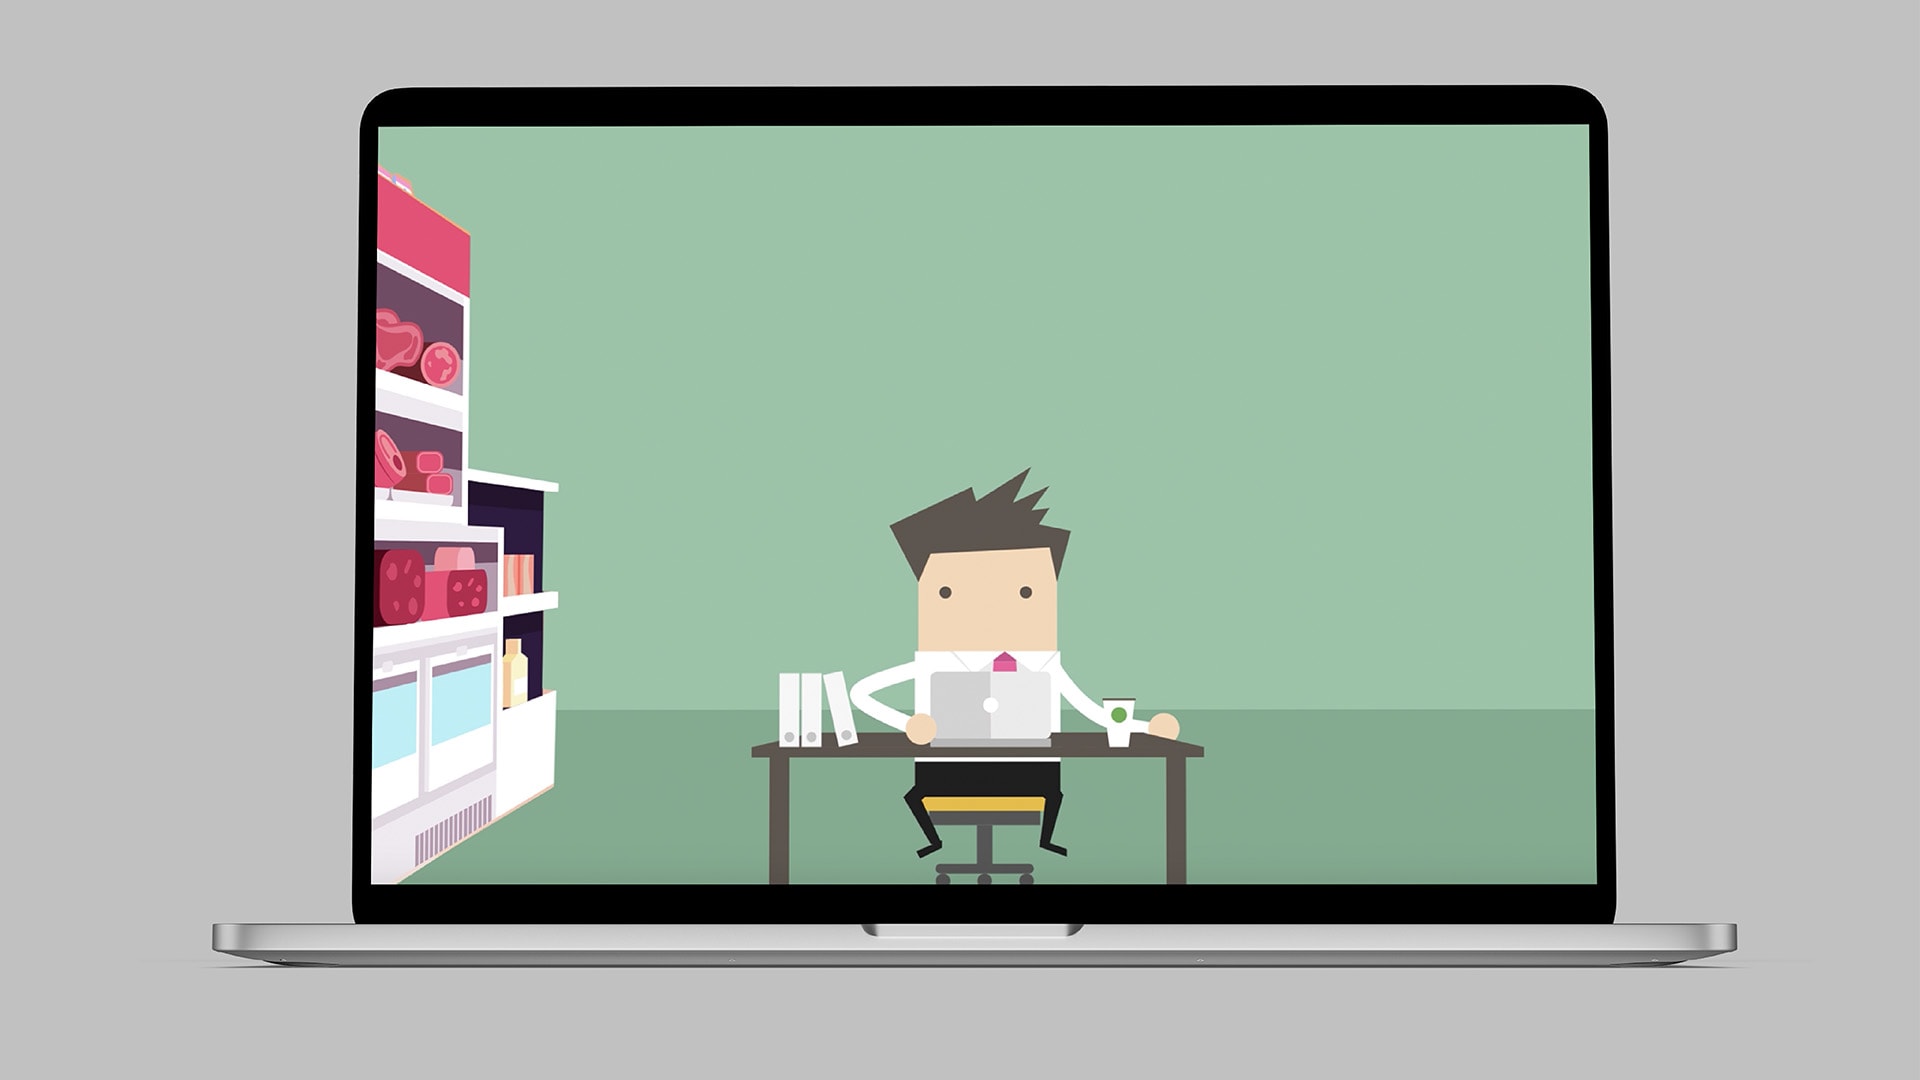 A laptop displaying the C-suite Pitch Pilot Brand Video Character Illustration showing a man sitting at a desk